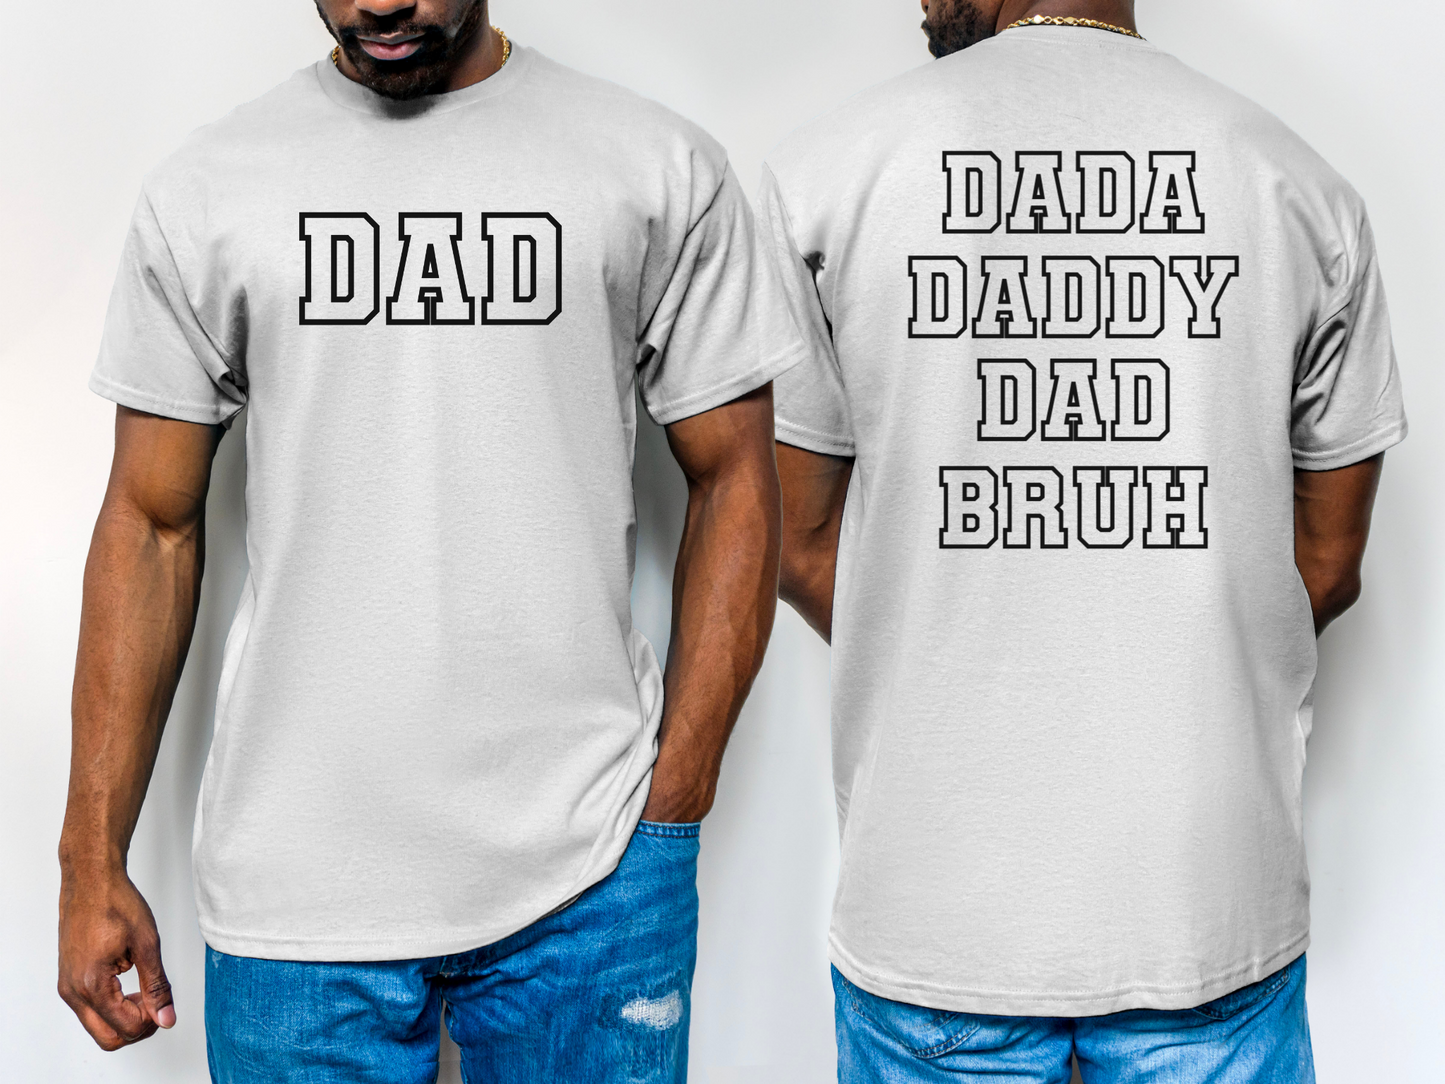 DaDa Daddy Dad Bruh, Dad Shirt, Dad Gift, Father's Day, Best Dad, Funny Dad Shirt, Front and Back Print Gildan 5000